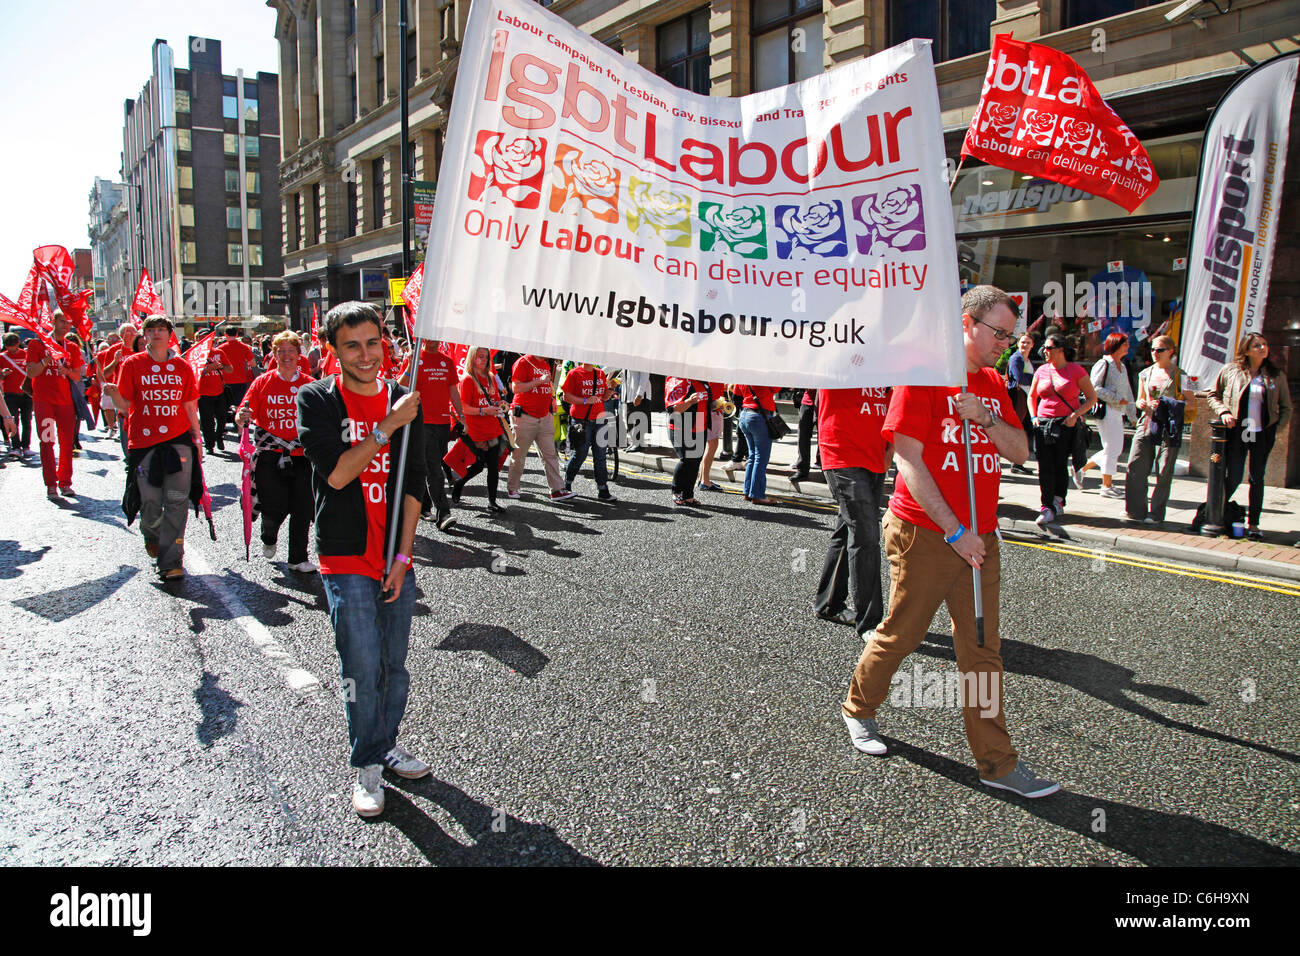 LGBT Labour marchers at Manchester Gay Pride Parade, Manchester, England Stock Photo